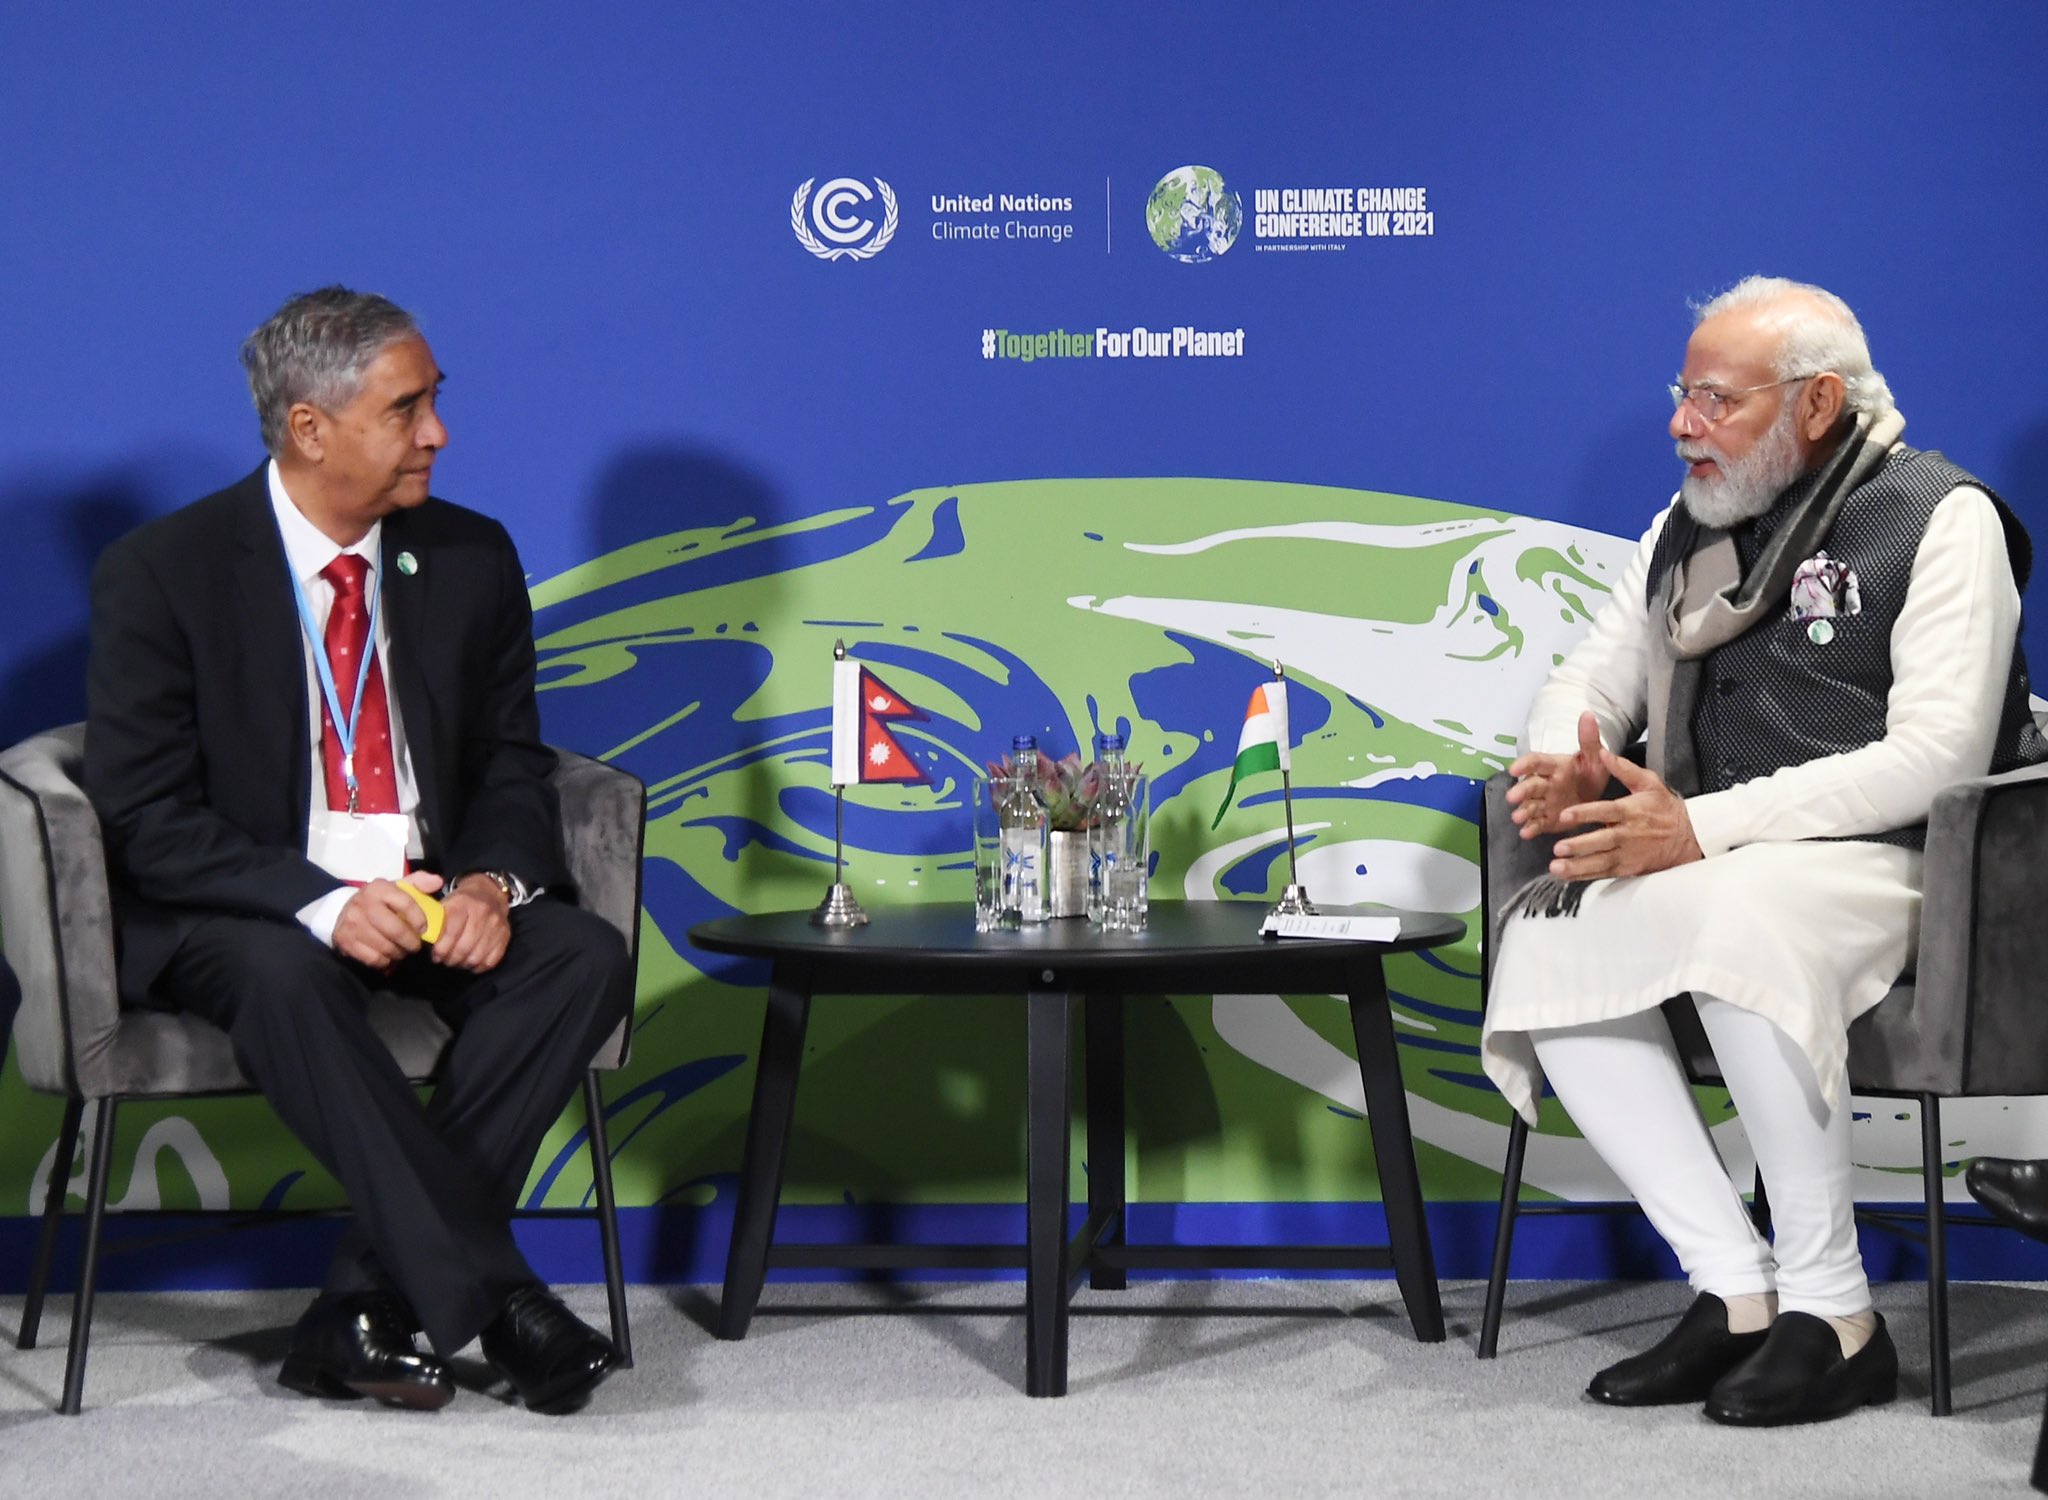 Prime Minister Sher Bahadur Deuba meets his Indian counterpart Narendra Modi, in Glasgow, Scotland, on the sidelines of the COP26, on Wednesday, November 3, 2021.